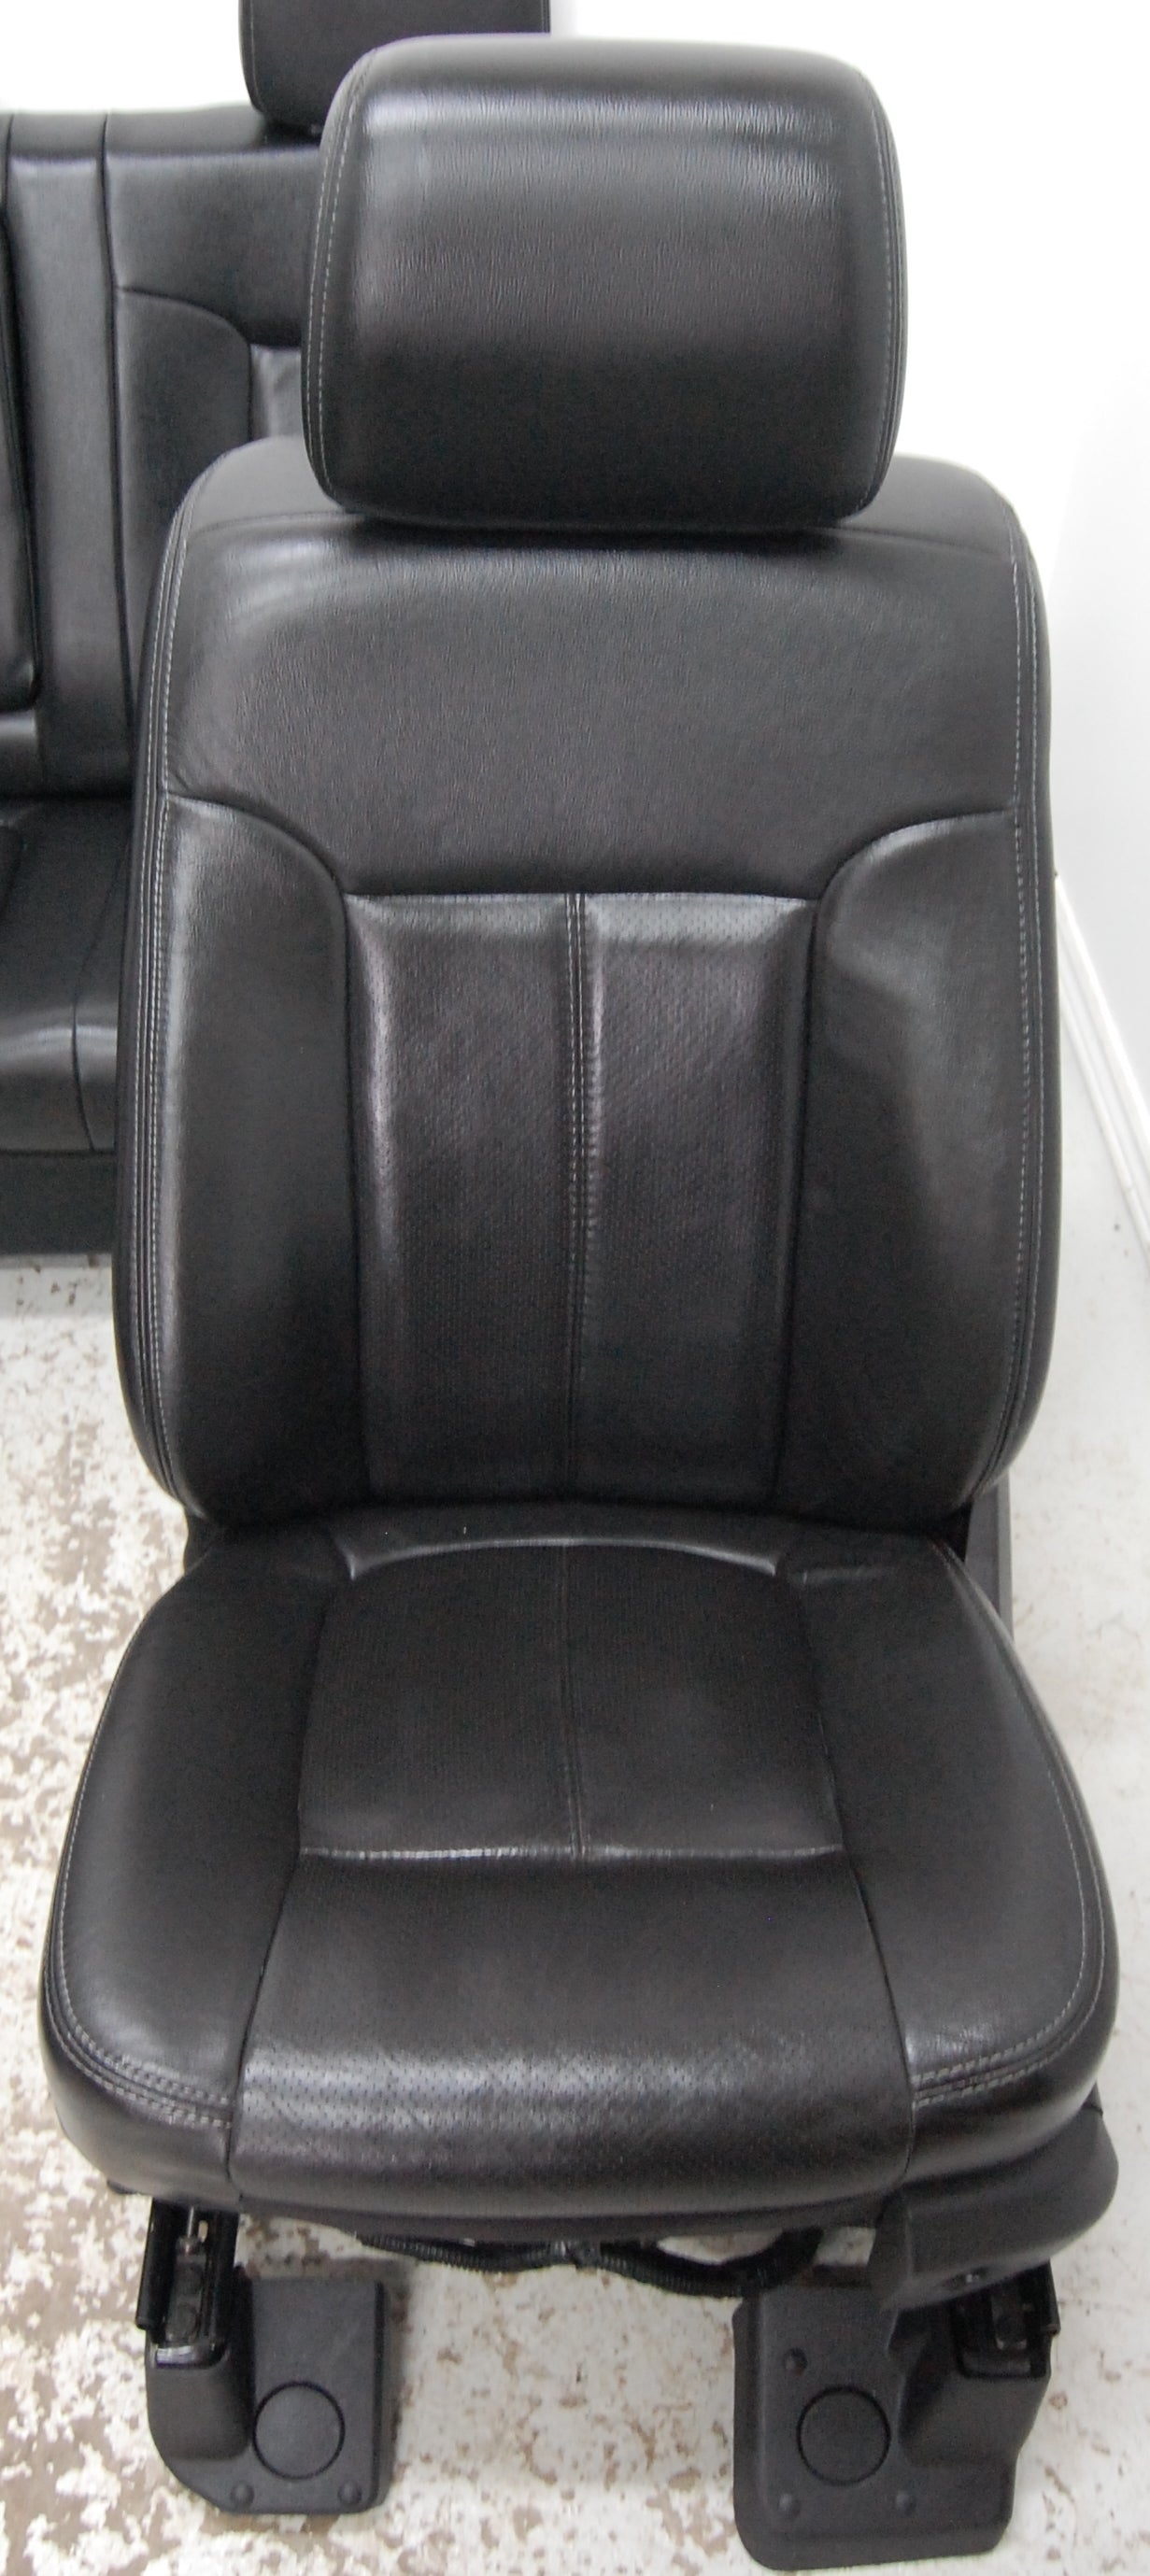 Ford F250 Superduty BLACK LEATHER Truck Seats Power Heated Cooled with Console